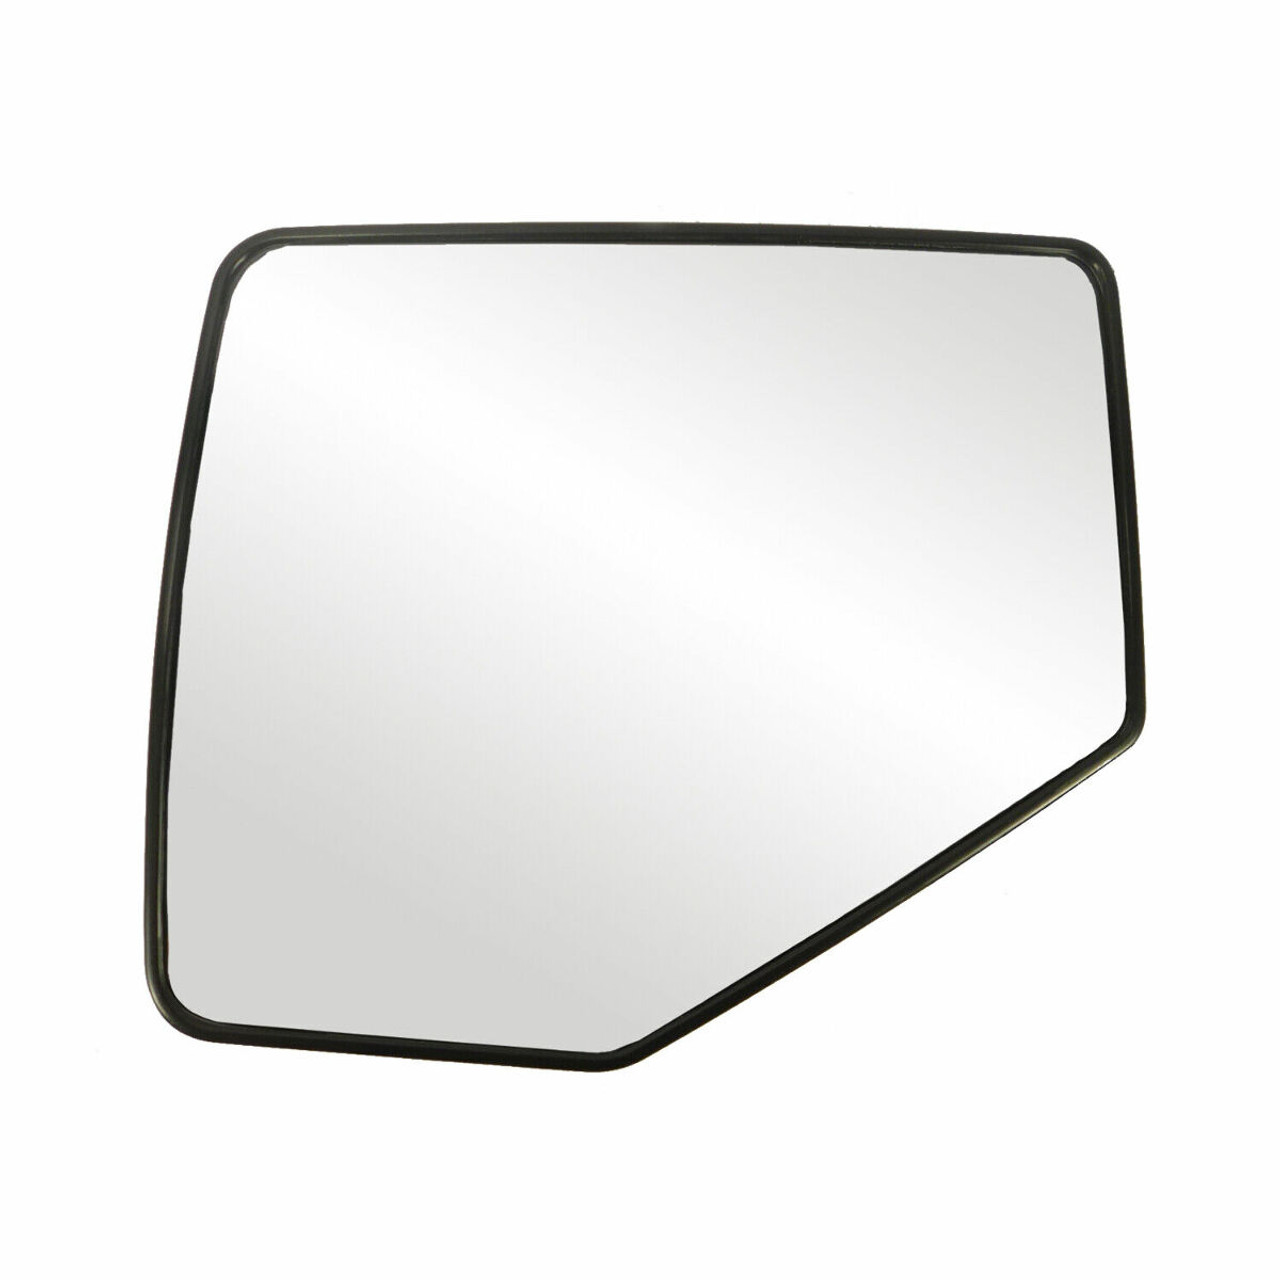 K SourceFits 06-10 Explorer, Mountaineer, Sport Trac, 06-11 Ranger, Mz B2300, 3000, 4000 Left Driver Mirror Glass Lens w/Adhesive USA w/o Opt. Rear Backing Plate